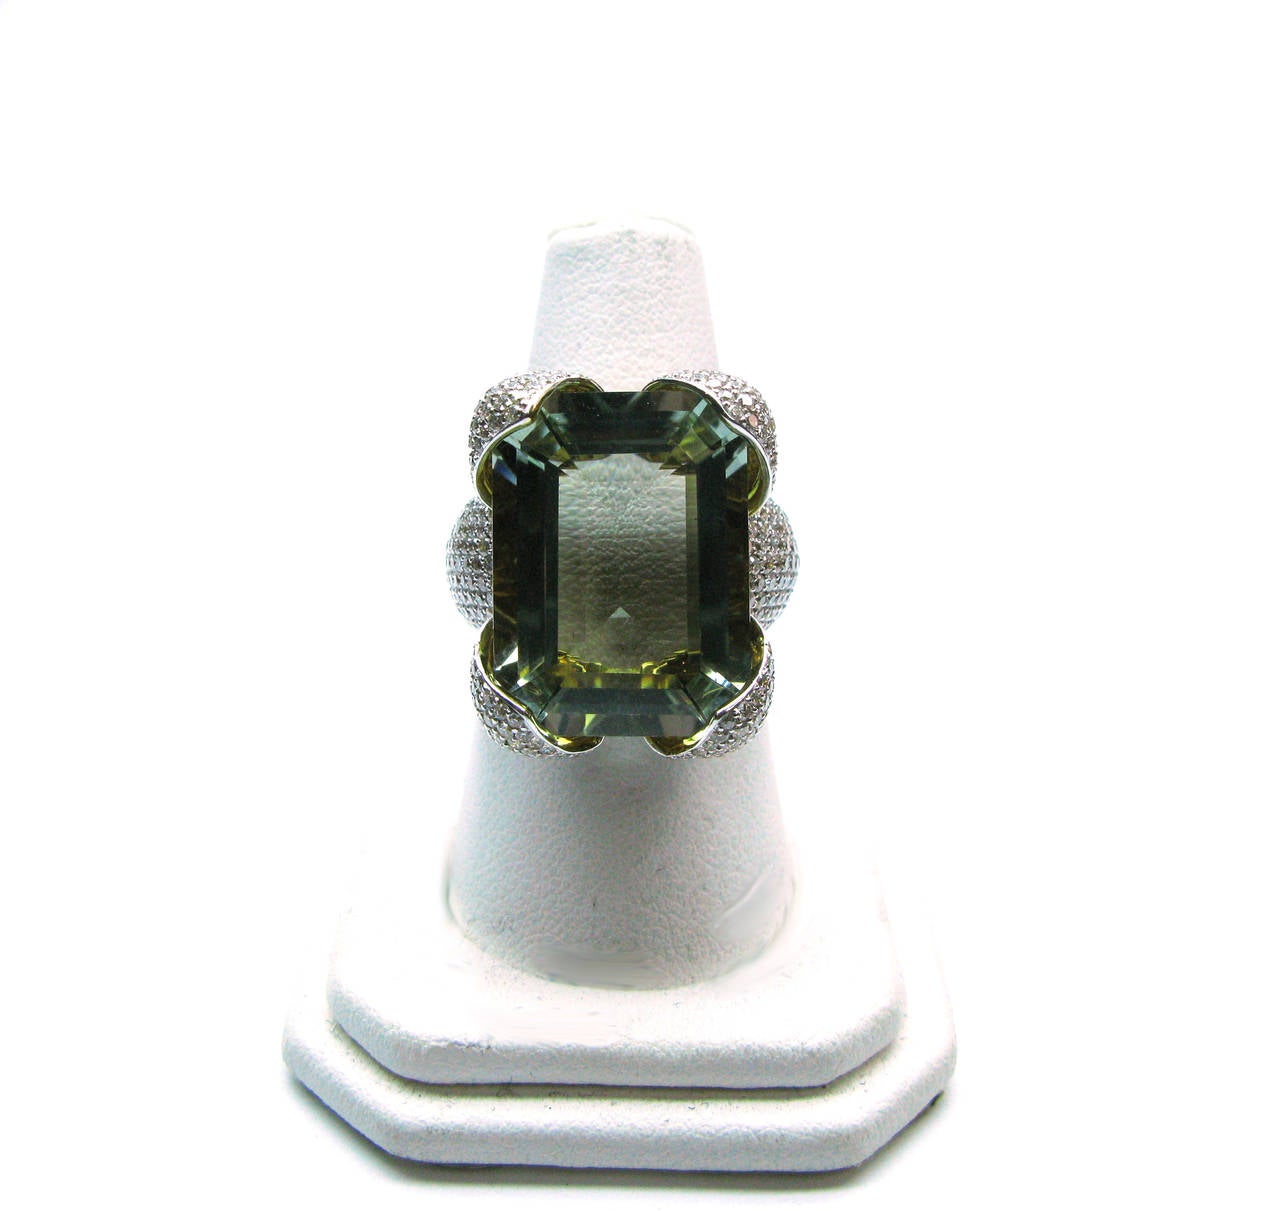 This stunning one-of-a-kind 18kt two-tone gold ring features a 20mm x 14.91mm step cut prasiolite (green quartz) gemstone held in place with pave diamond accented petal-like prongs. This whimsical piece is for the creative woman who dares to be